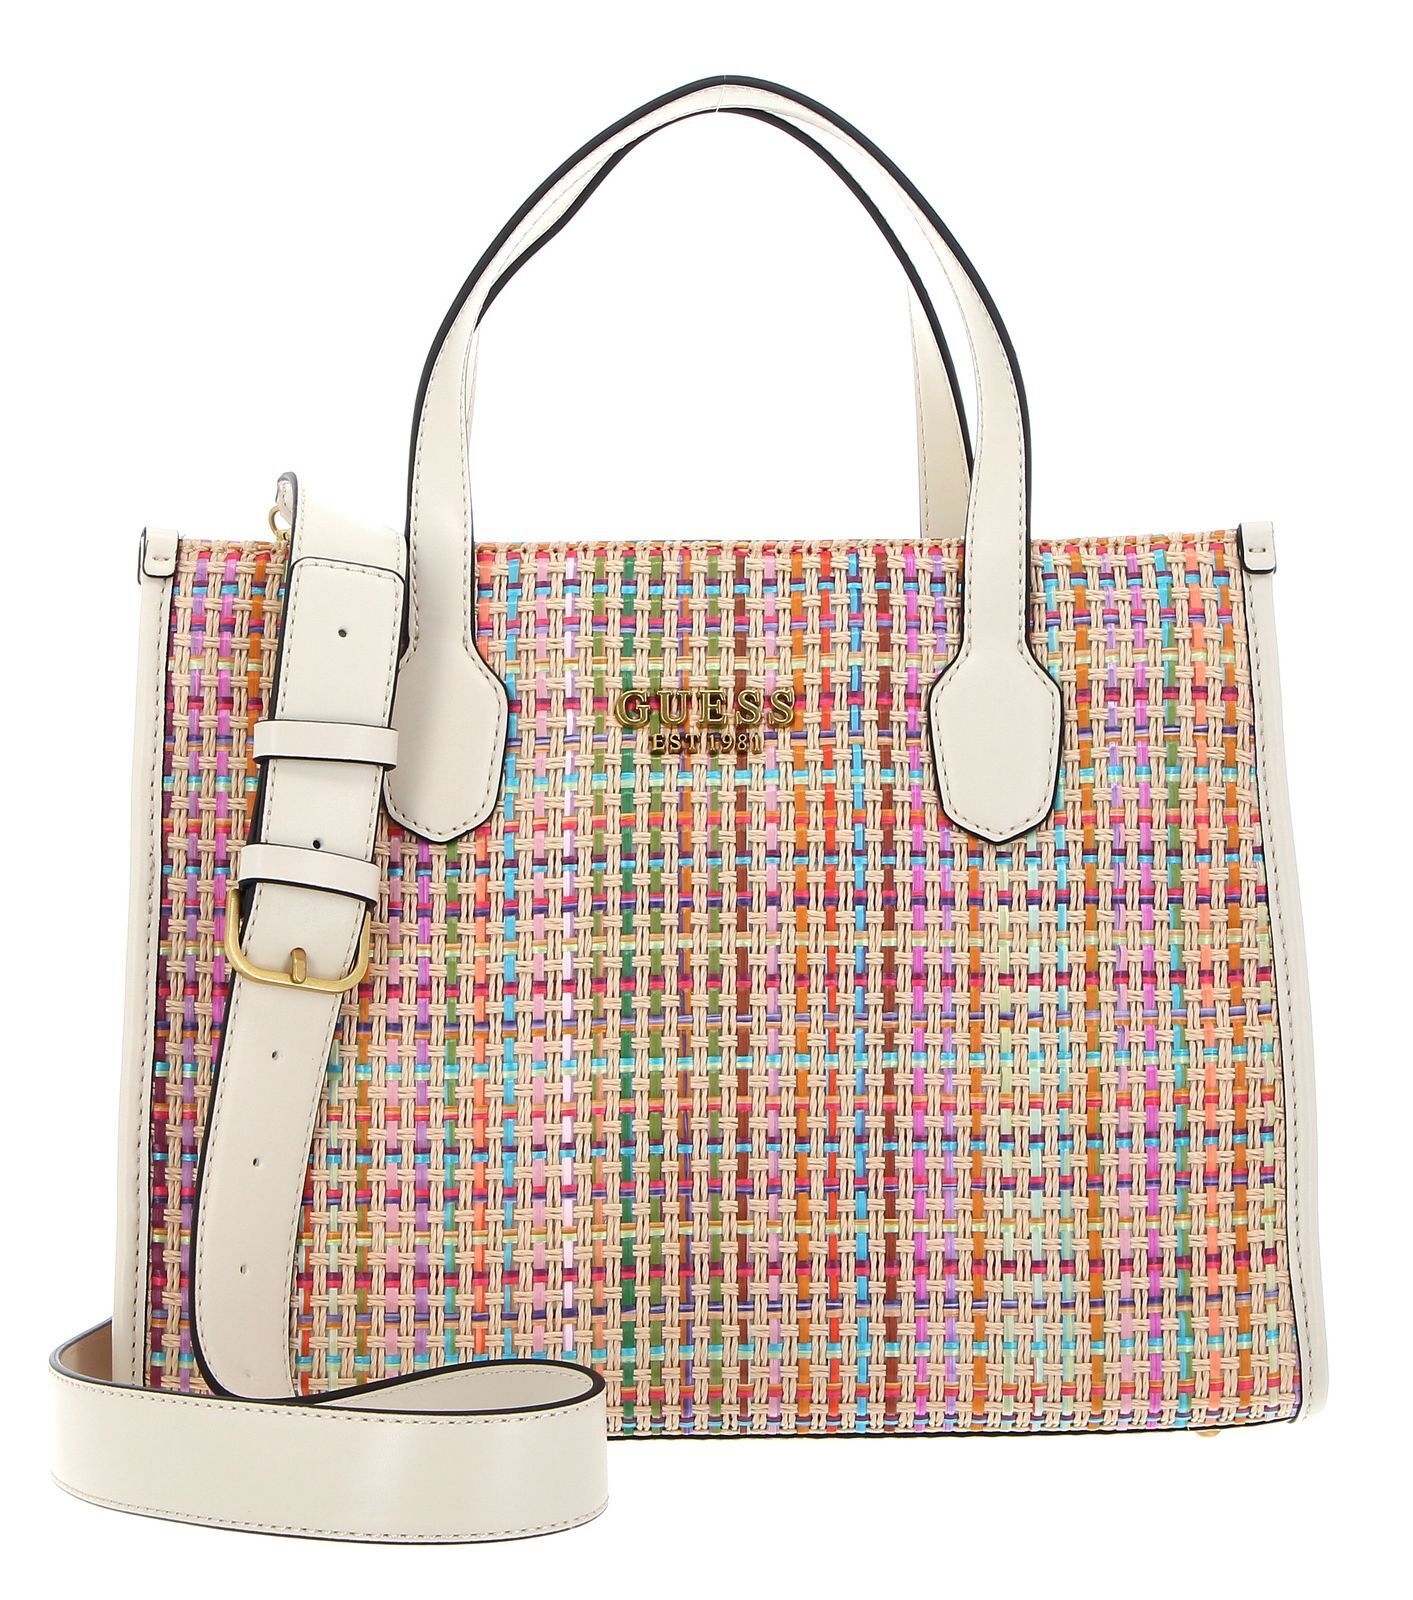 Guess SILVANA 2 COMPARTMENT TOTE